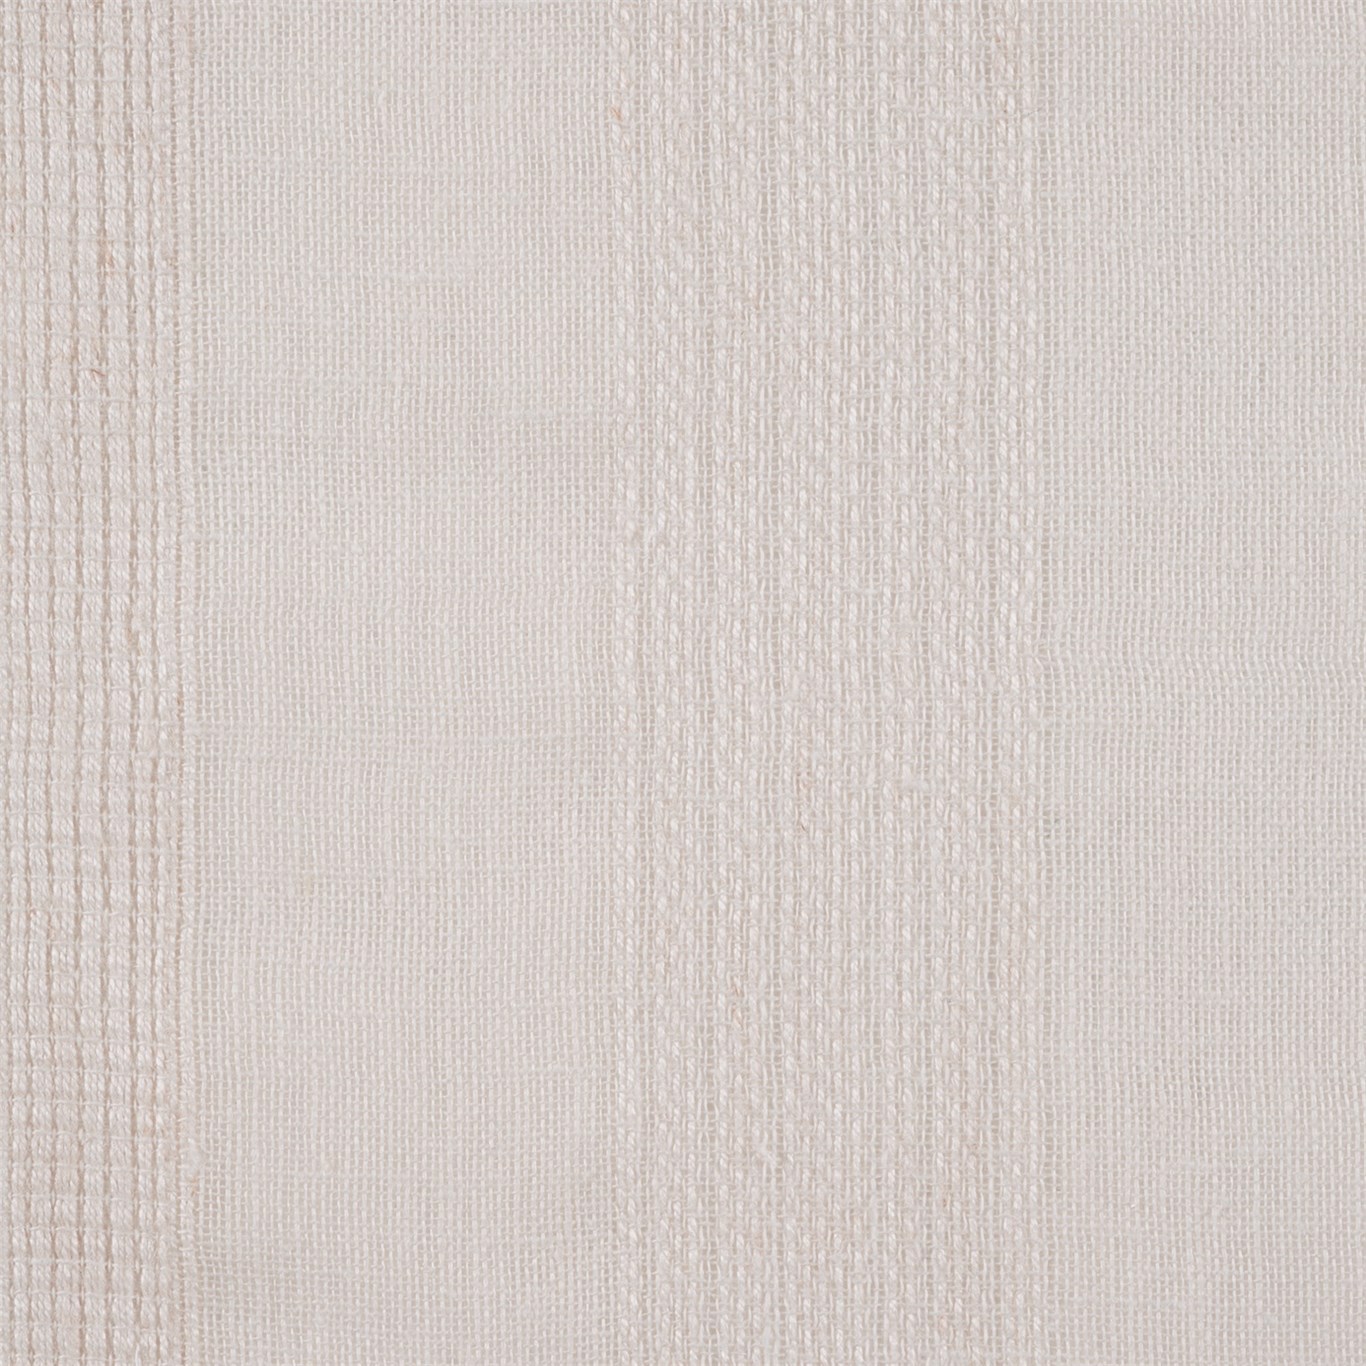 Purity Voiles Cream Fabric by HAR